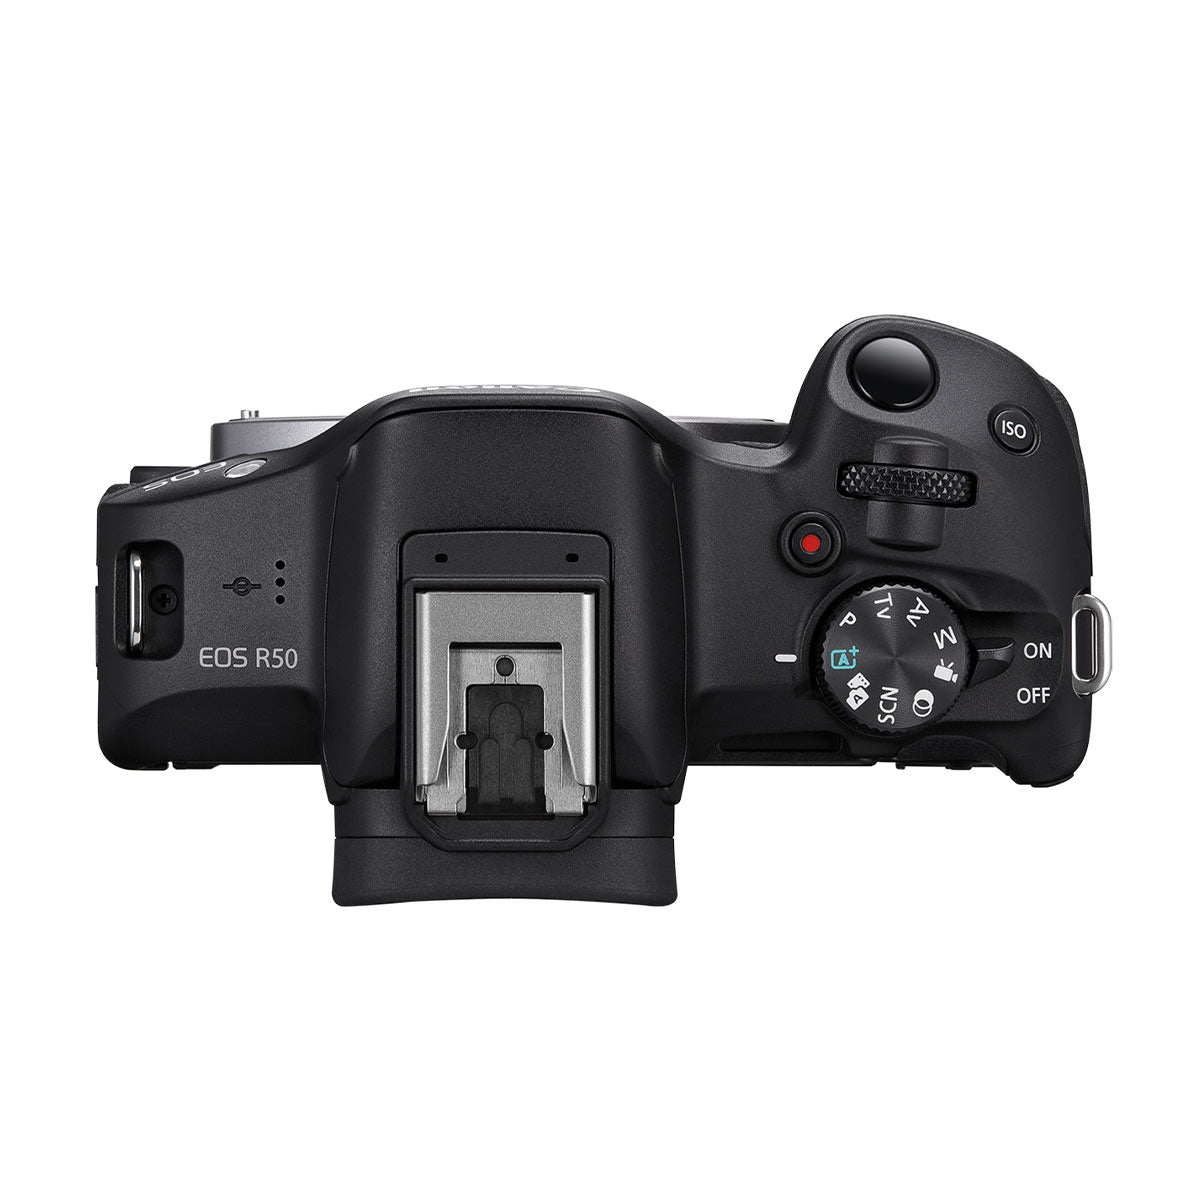 Speedlite Flash with LCD Display Compatible with Canon EOS R50